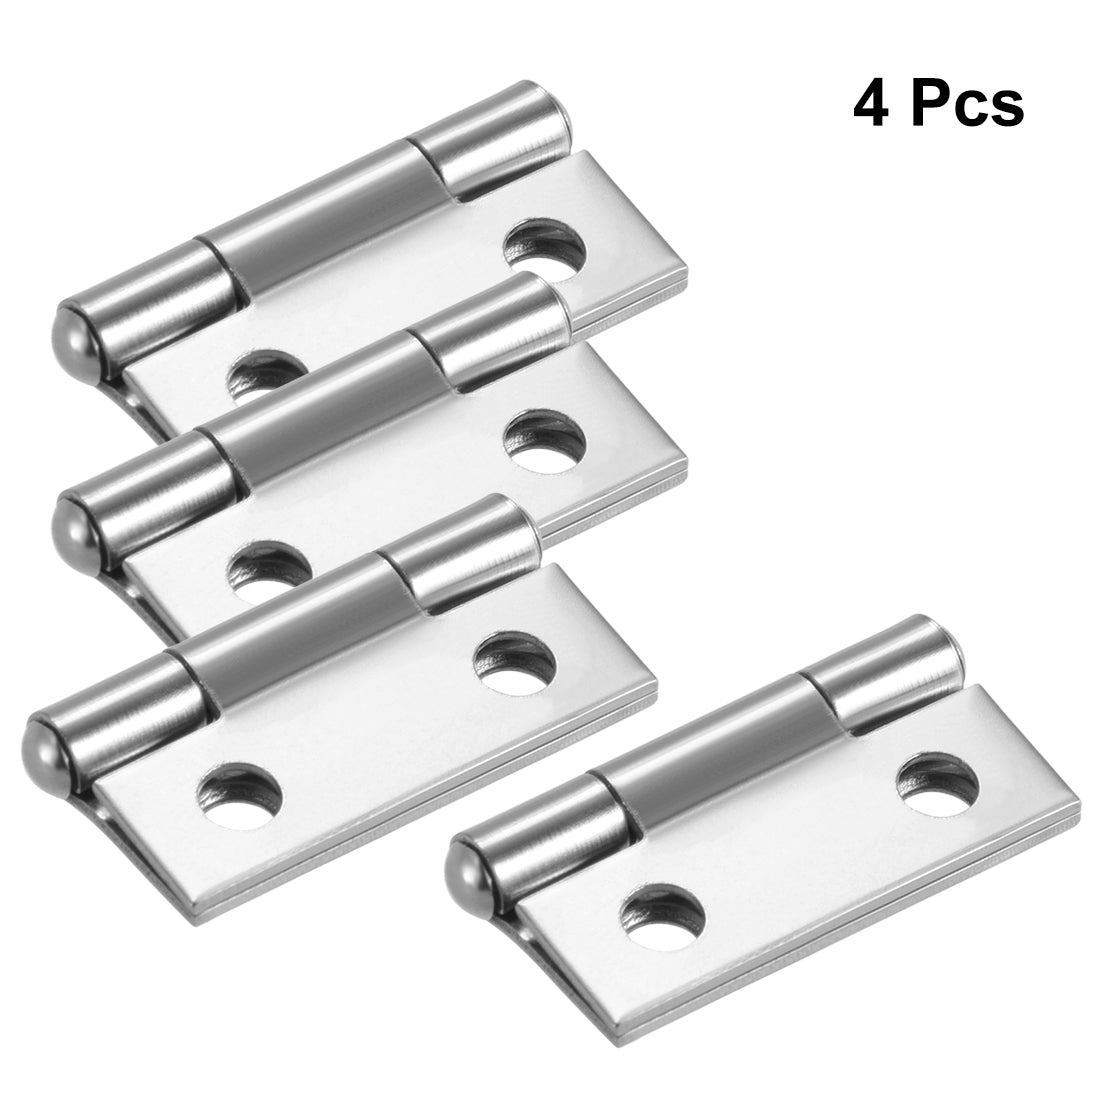 uxcell Uxcell 0.98" Hinge Silver Door Cabinet Hinges Fittings Brushed Chrome Plain 4 pcs